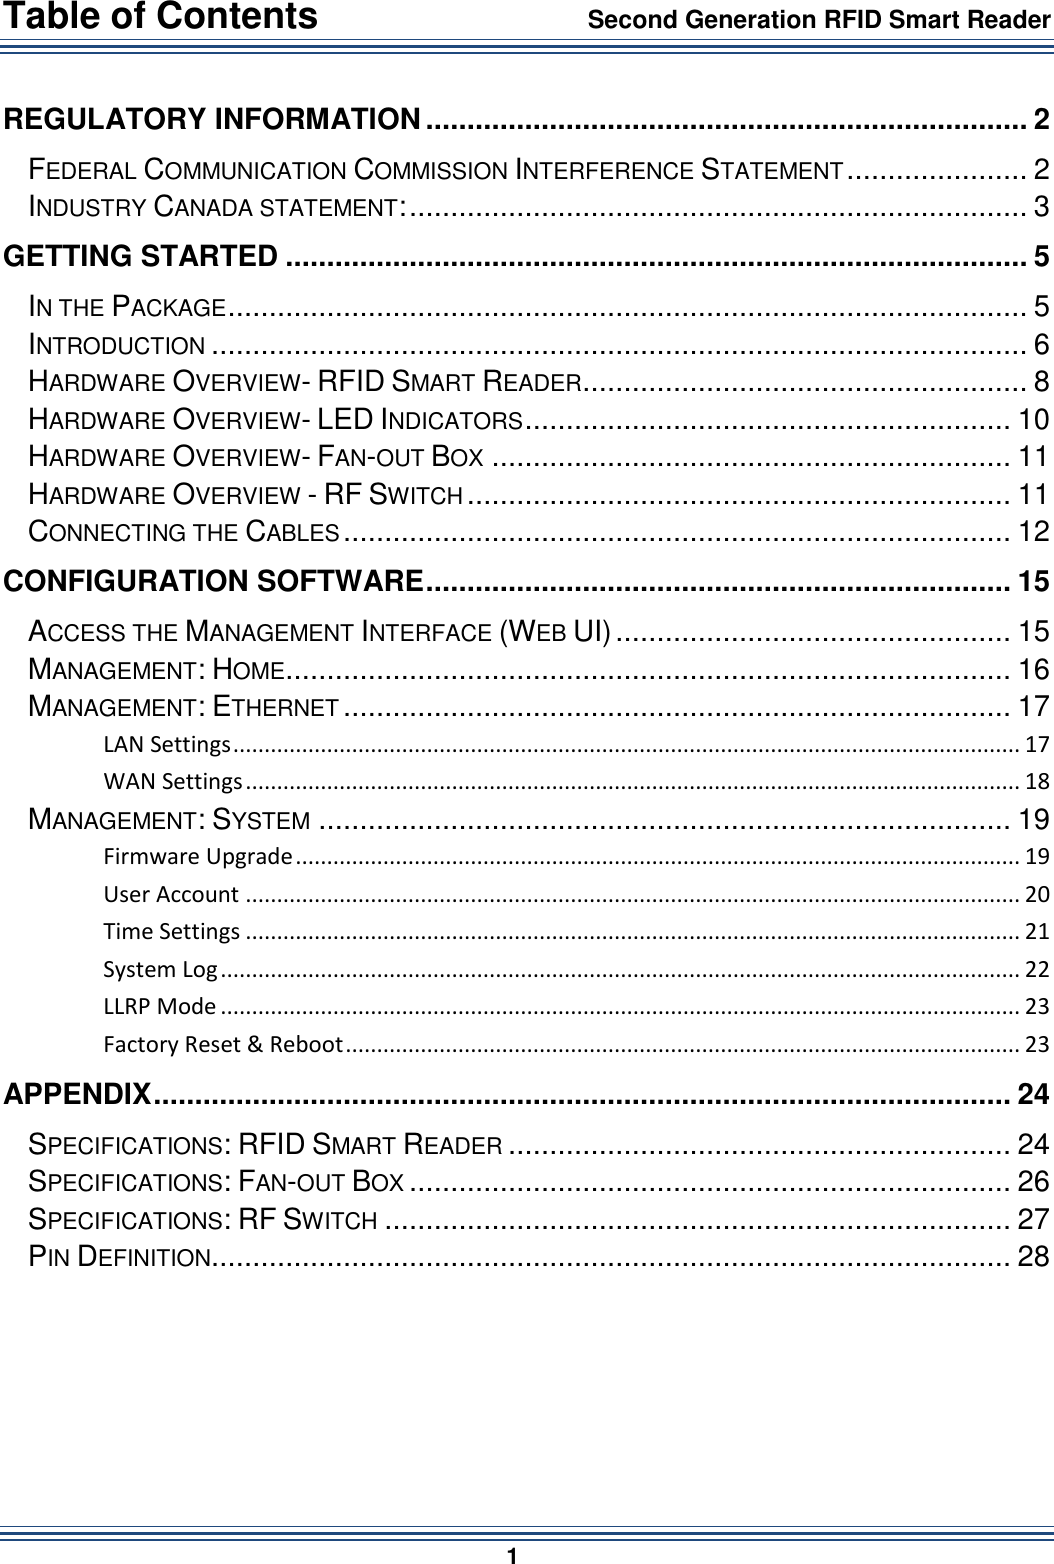 Table of Contents                 Second Generation RFID Smart Reader                        1  REGULATORY INFORMATION ......................................................................... 2 FEDERAL COMMUNICATION COMMISSION INTERFERENCE STATEMENT ...................... 2 INDUSTRY CANADA STATEMENT: ........................................................................... 3 GETTING STARTED .......................................................................................... 5 IN THE PACKAGE ................................................................................................. 5 INTRODUCTION ................................................................................................... 6 HARDWARE OVERVIEW- RFID SMART READER ...................................................... 8 HARDWARE OVERVIEW- LED INDICATORS ........................................................... 10 HARDWARE OVERVIEW- FAN-OUT BOX ............................................................... 11 HARDWARE OVERVIEW - RF SWITCH .................................................................. 11 CONNECTING THE CABLES ................................................................................. 12 CONFIGURATION SOFTWARE ....................................................................... 15 ACCESS THE MANAGEMENT INTERFACE (WEB UI) ................................................ 15 MANAGEMENT: HOME ........................................................................................ 16 MANAGEMENT: ETHERNET ................................................................................. 17 LAN Settings .............................................................................................................................. 17 WAN Settings ............................................................................................................................ 18 MANAGEMENT: SYSTEM .................................................................................... 19 Firmware Upgrade .................................................................................................................... 19 User Account ............................................................................................................................ 20 Time Settings ............................................................................................................................ 21 System Log ................................................................................................................................ 22 LLRP Mode ................................................................................................................................ 23 Factory Reset &amp; Reboot ............................................................................................................ 23 APPENDIX ........................................................................................................ 24 SPECIFICATIONS: RFID SMART READER ............................................................. 24 SPECIFICATIONS: FAN-OUT BOX ......................................................................... 26 SPECIFICATIONS: RF SWITCH ............................................................................ 27 PIN DEFINITION ................................................................................................. 28   